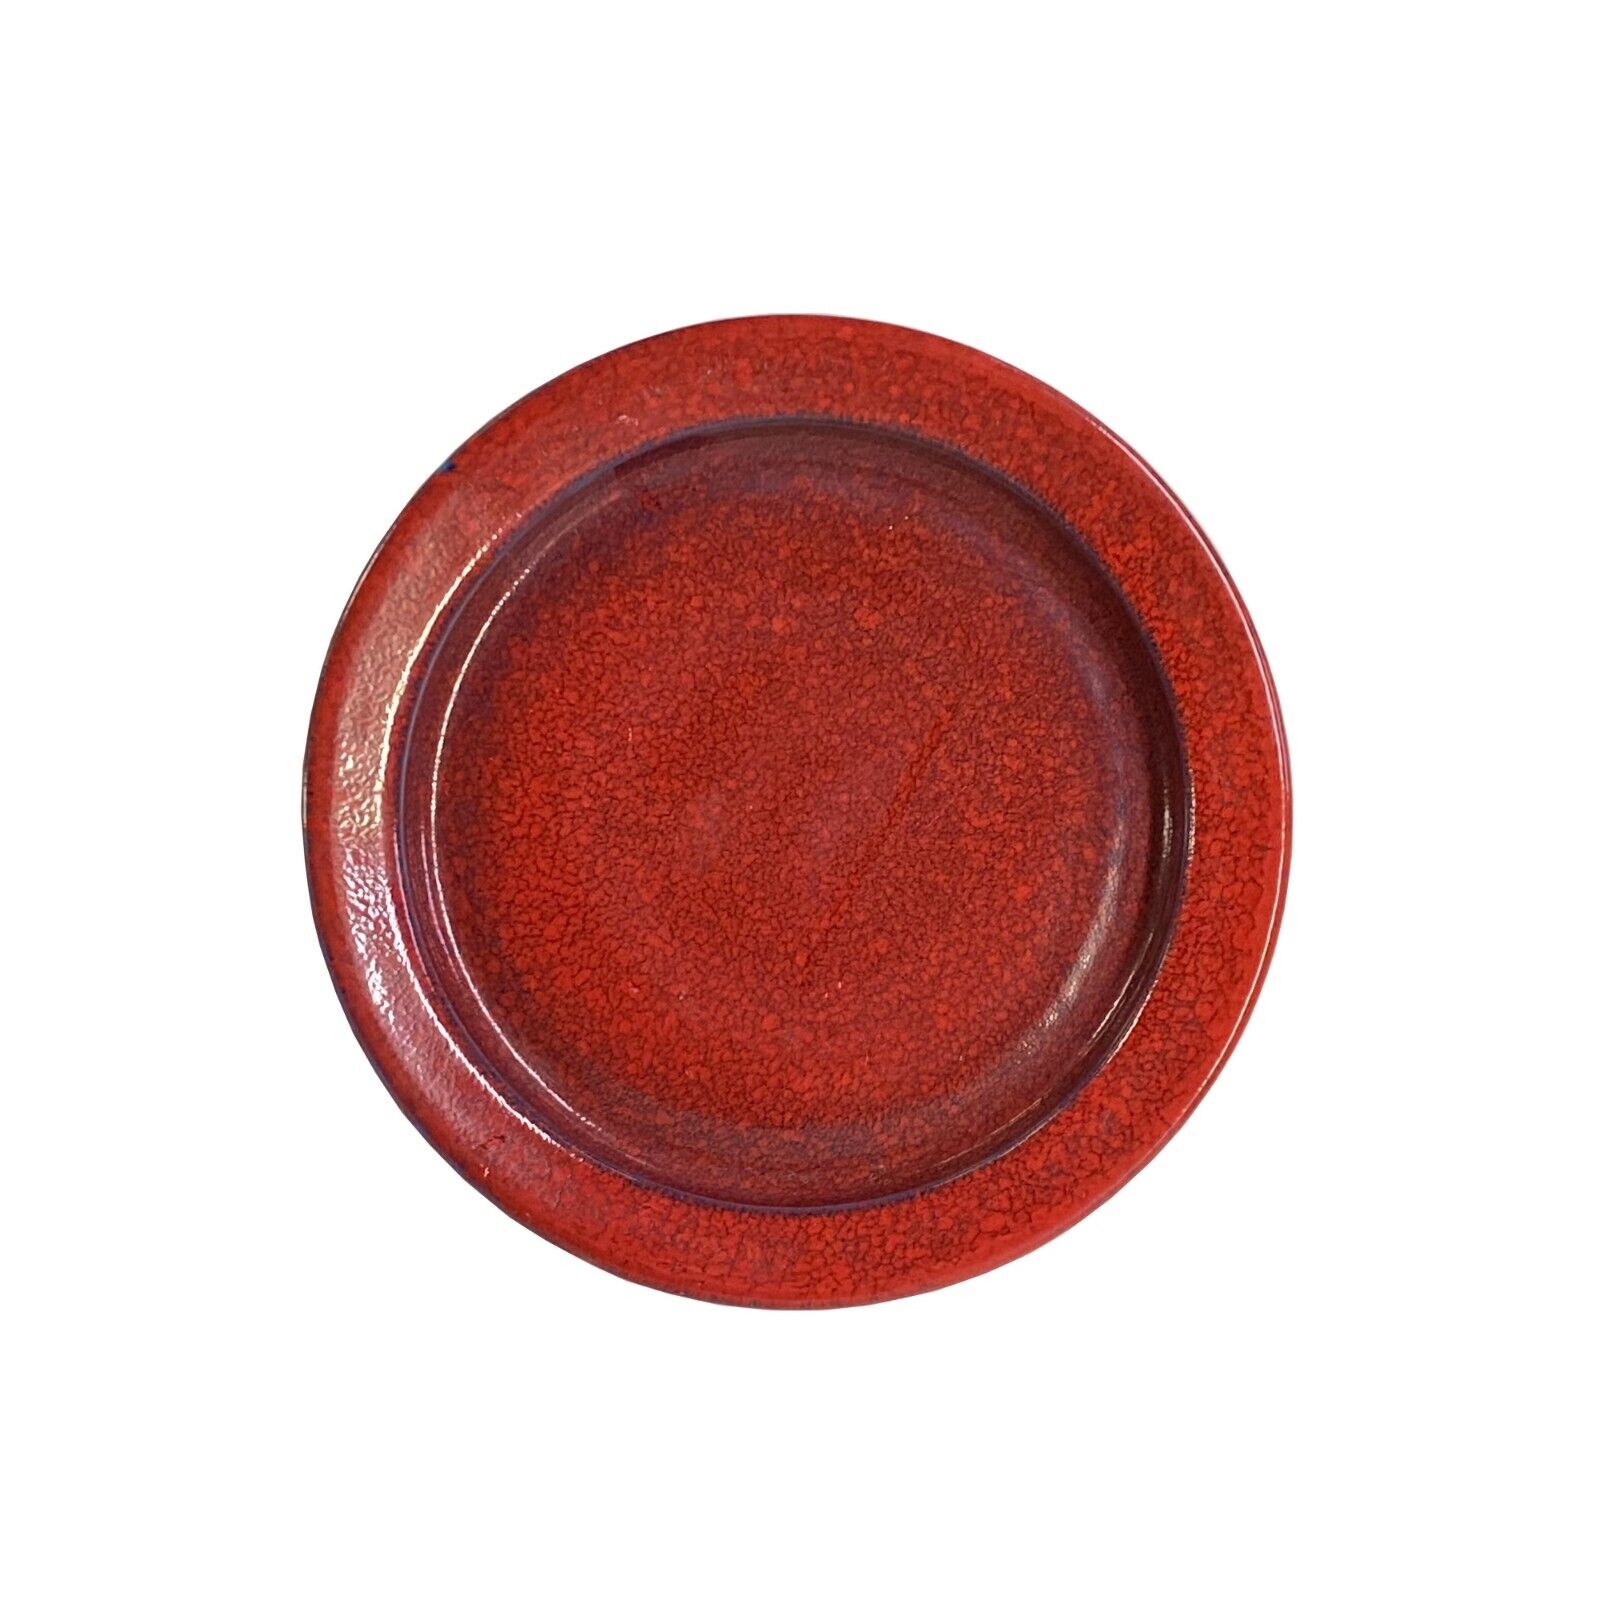 Simple Plain Solid Brick Red Glaze Porcelain Round Plate Display Art ws3363